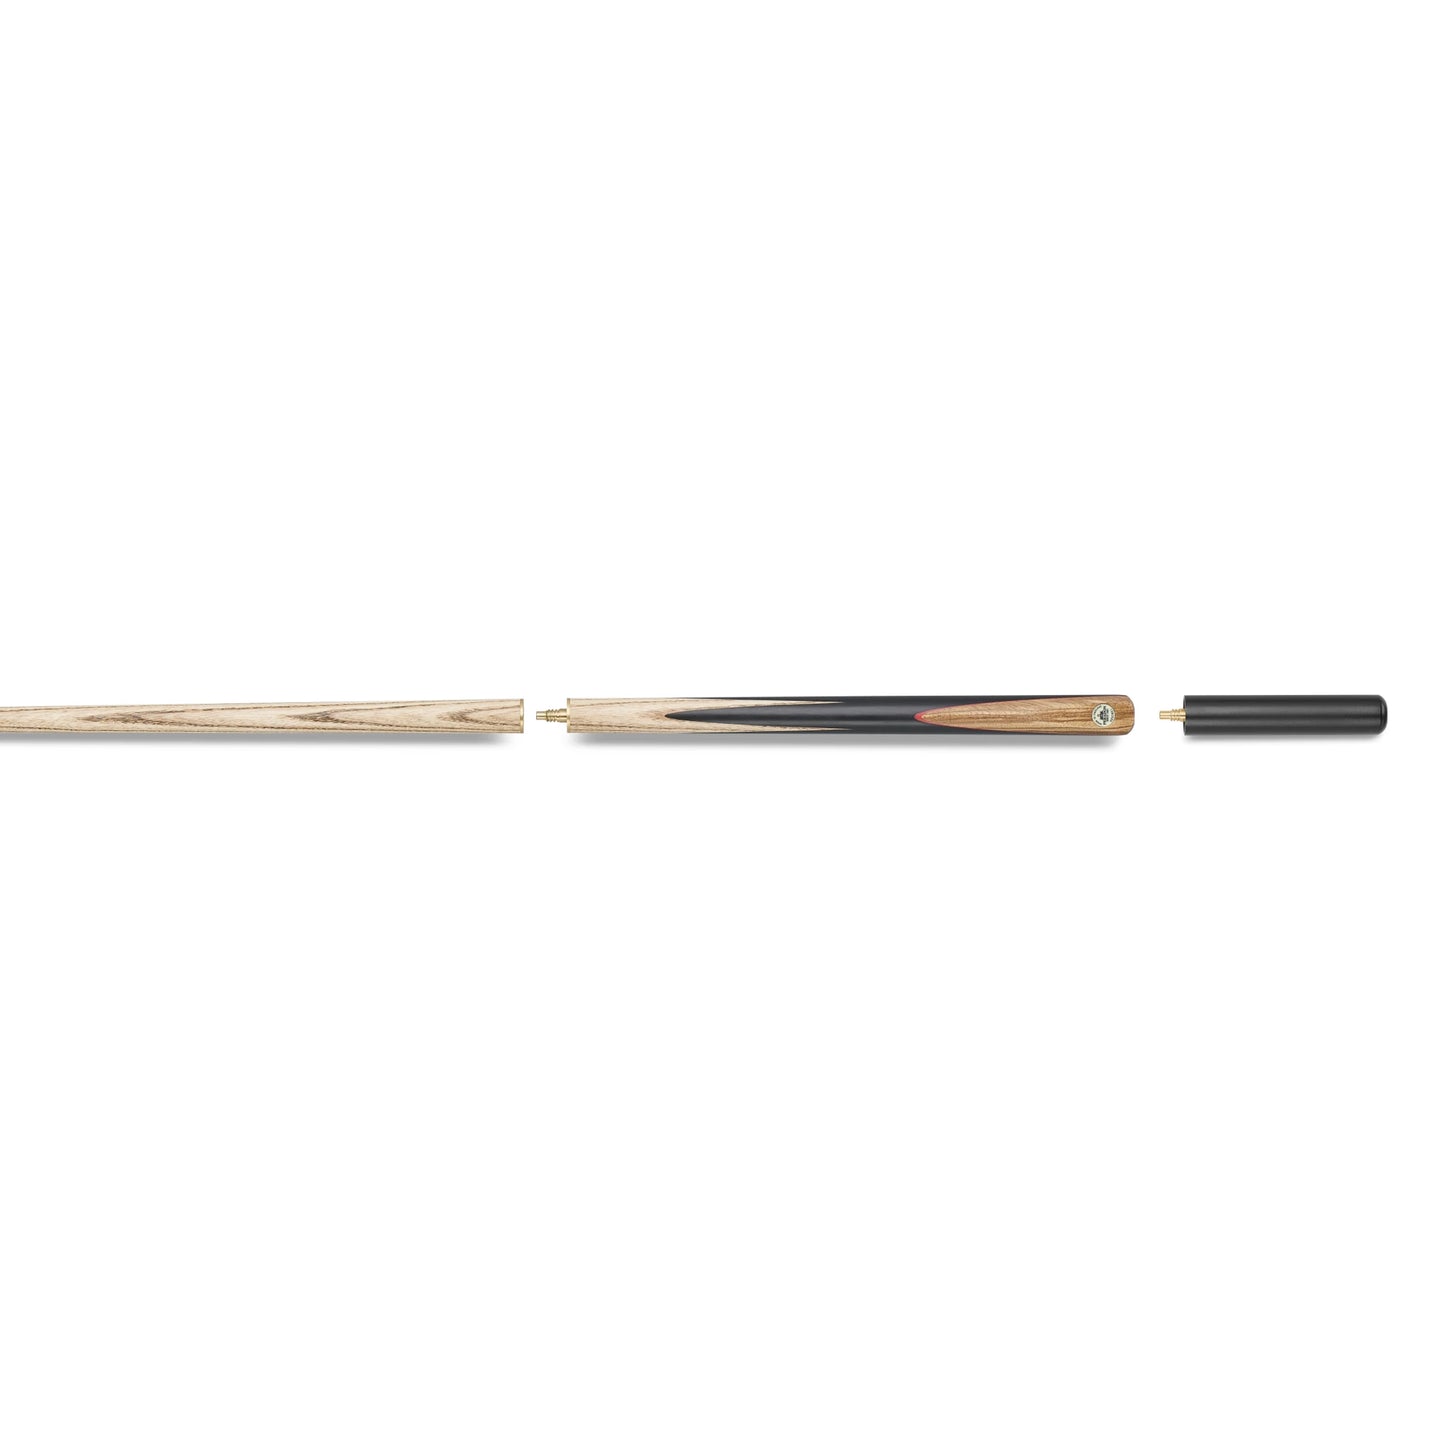 Peradon Kestrel ¾ Jointed 8 Ball Pool Cue with Mini Butt